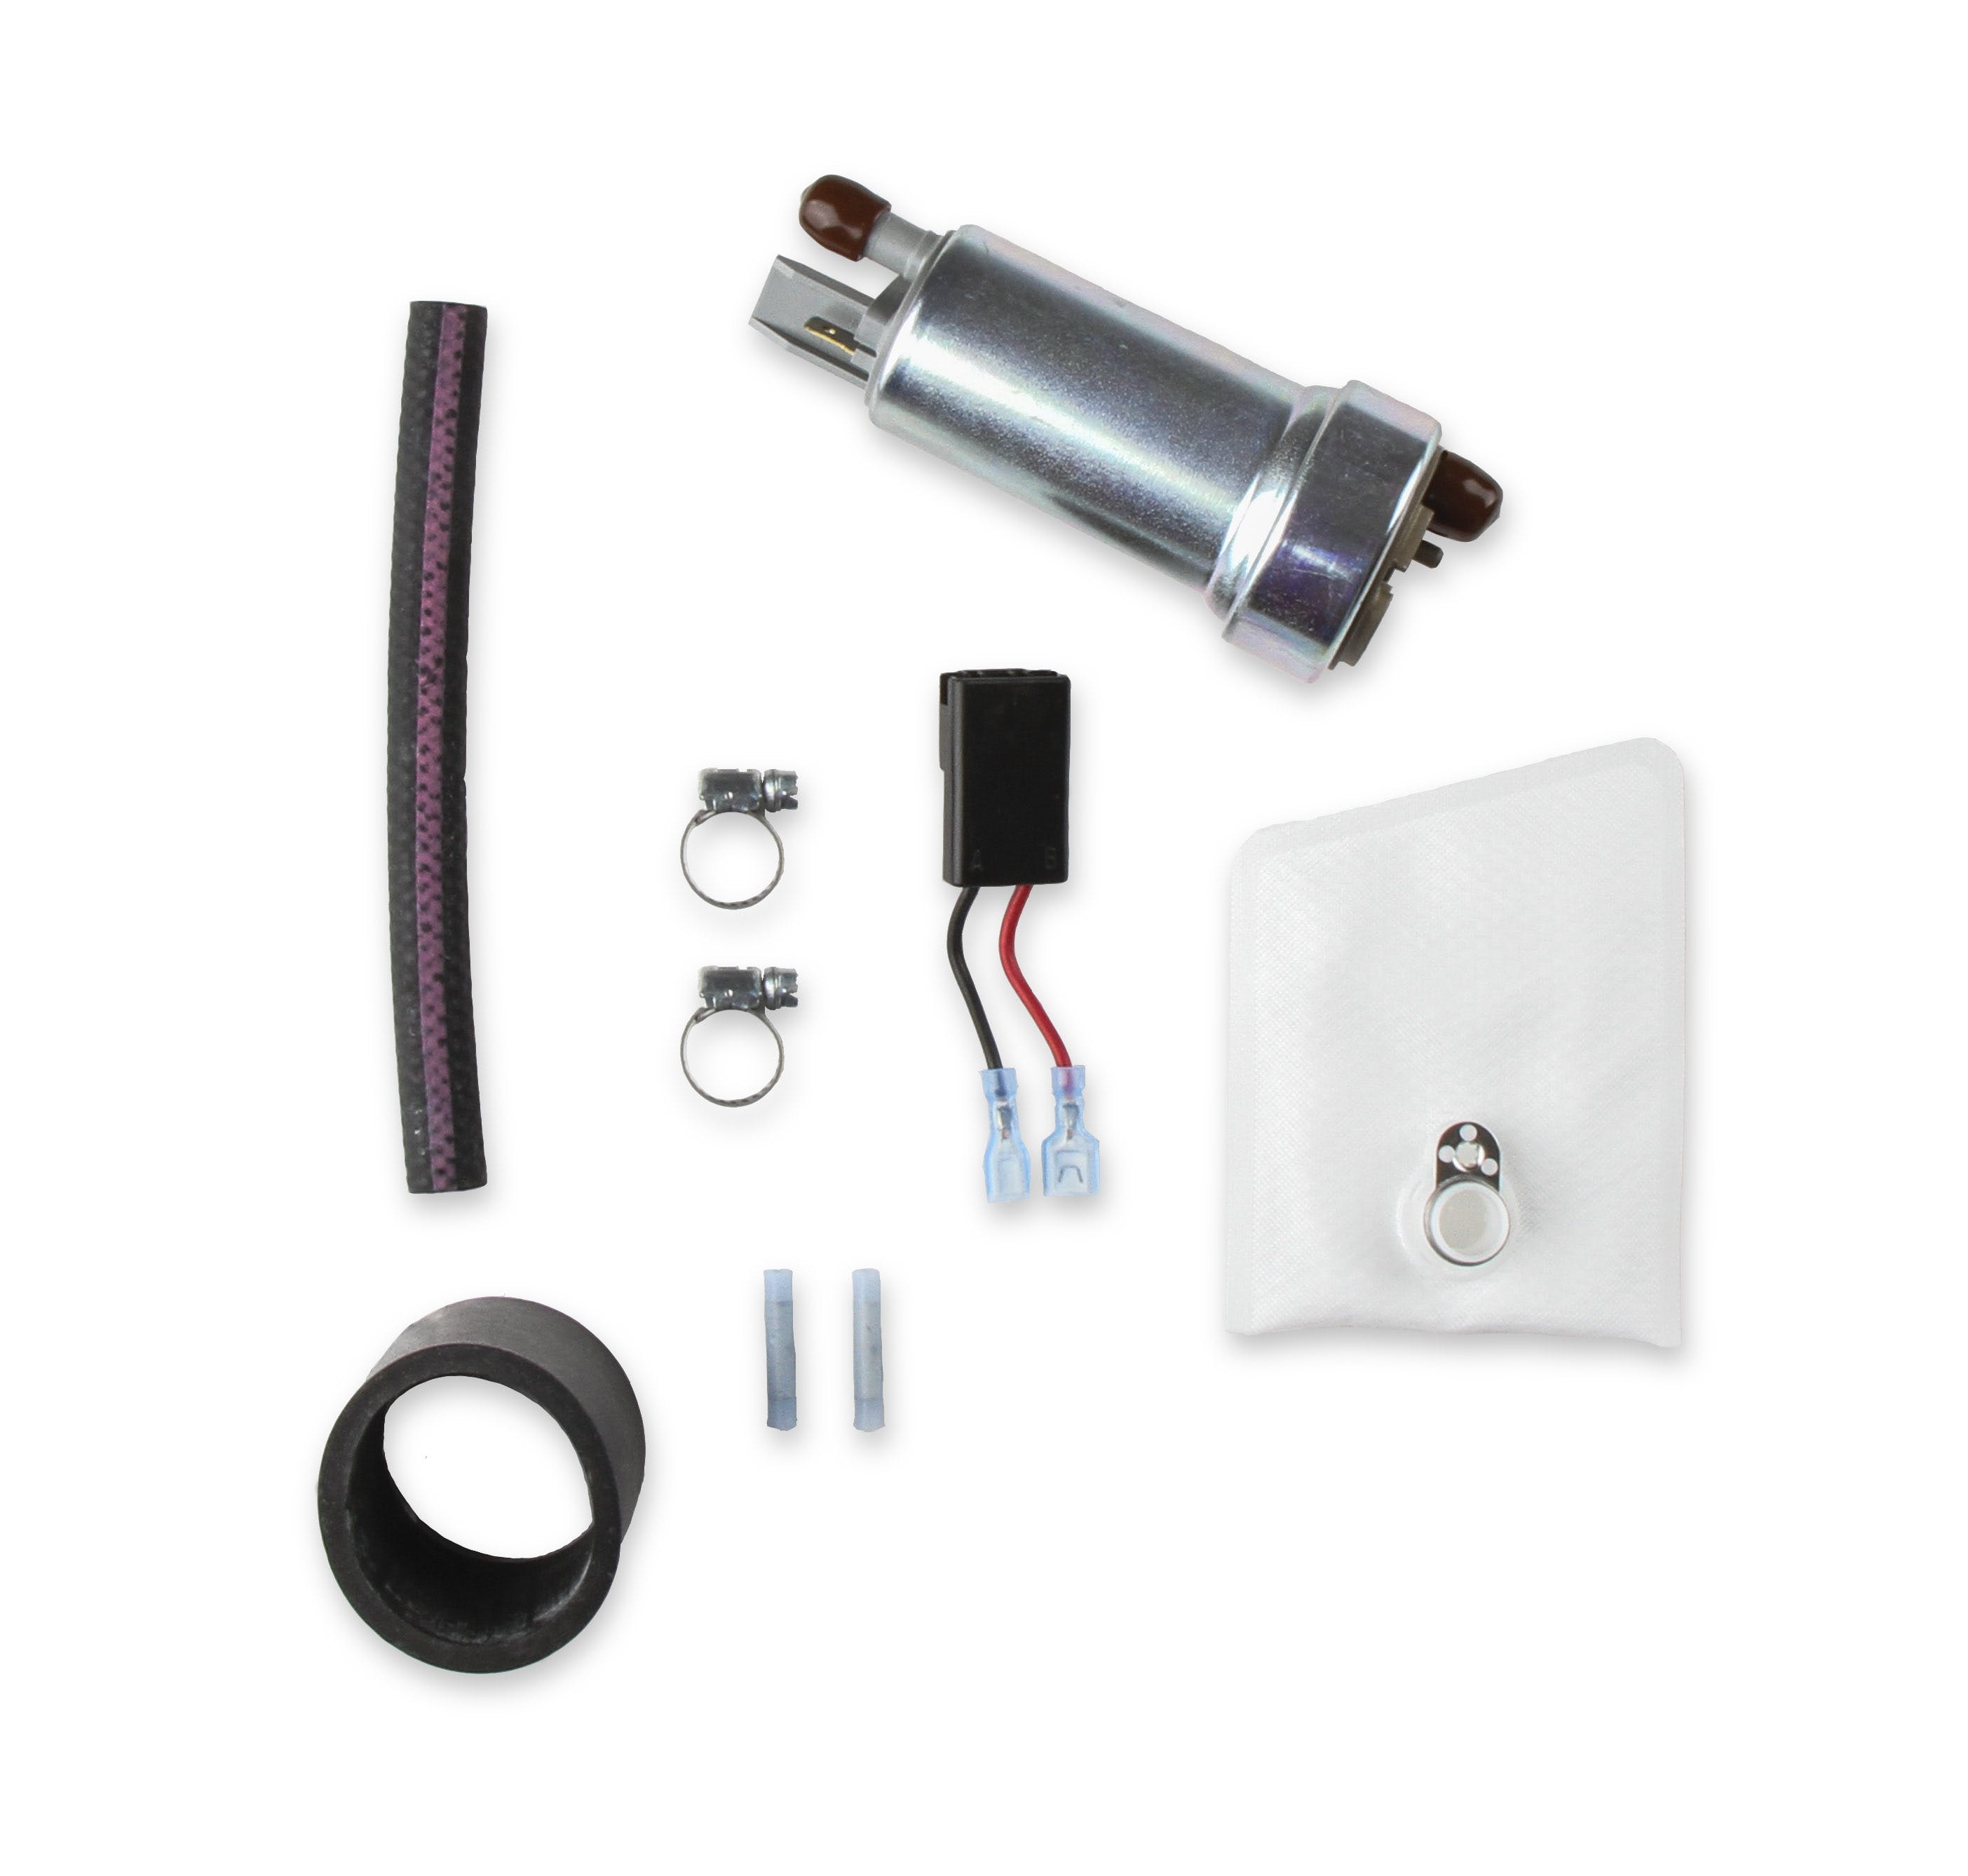 Holley 12-962 350LPH UNIVERSAL IN-TANK FUEL PUMP KIT